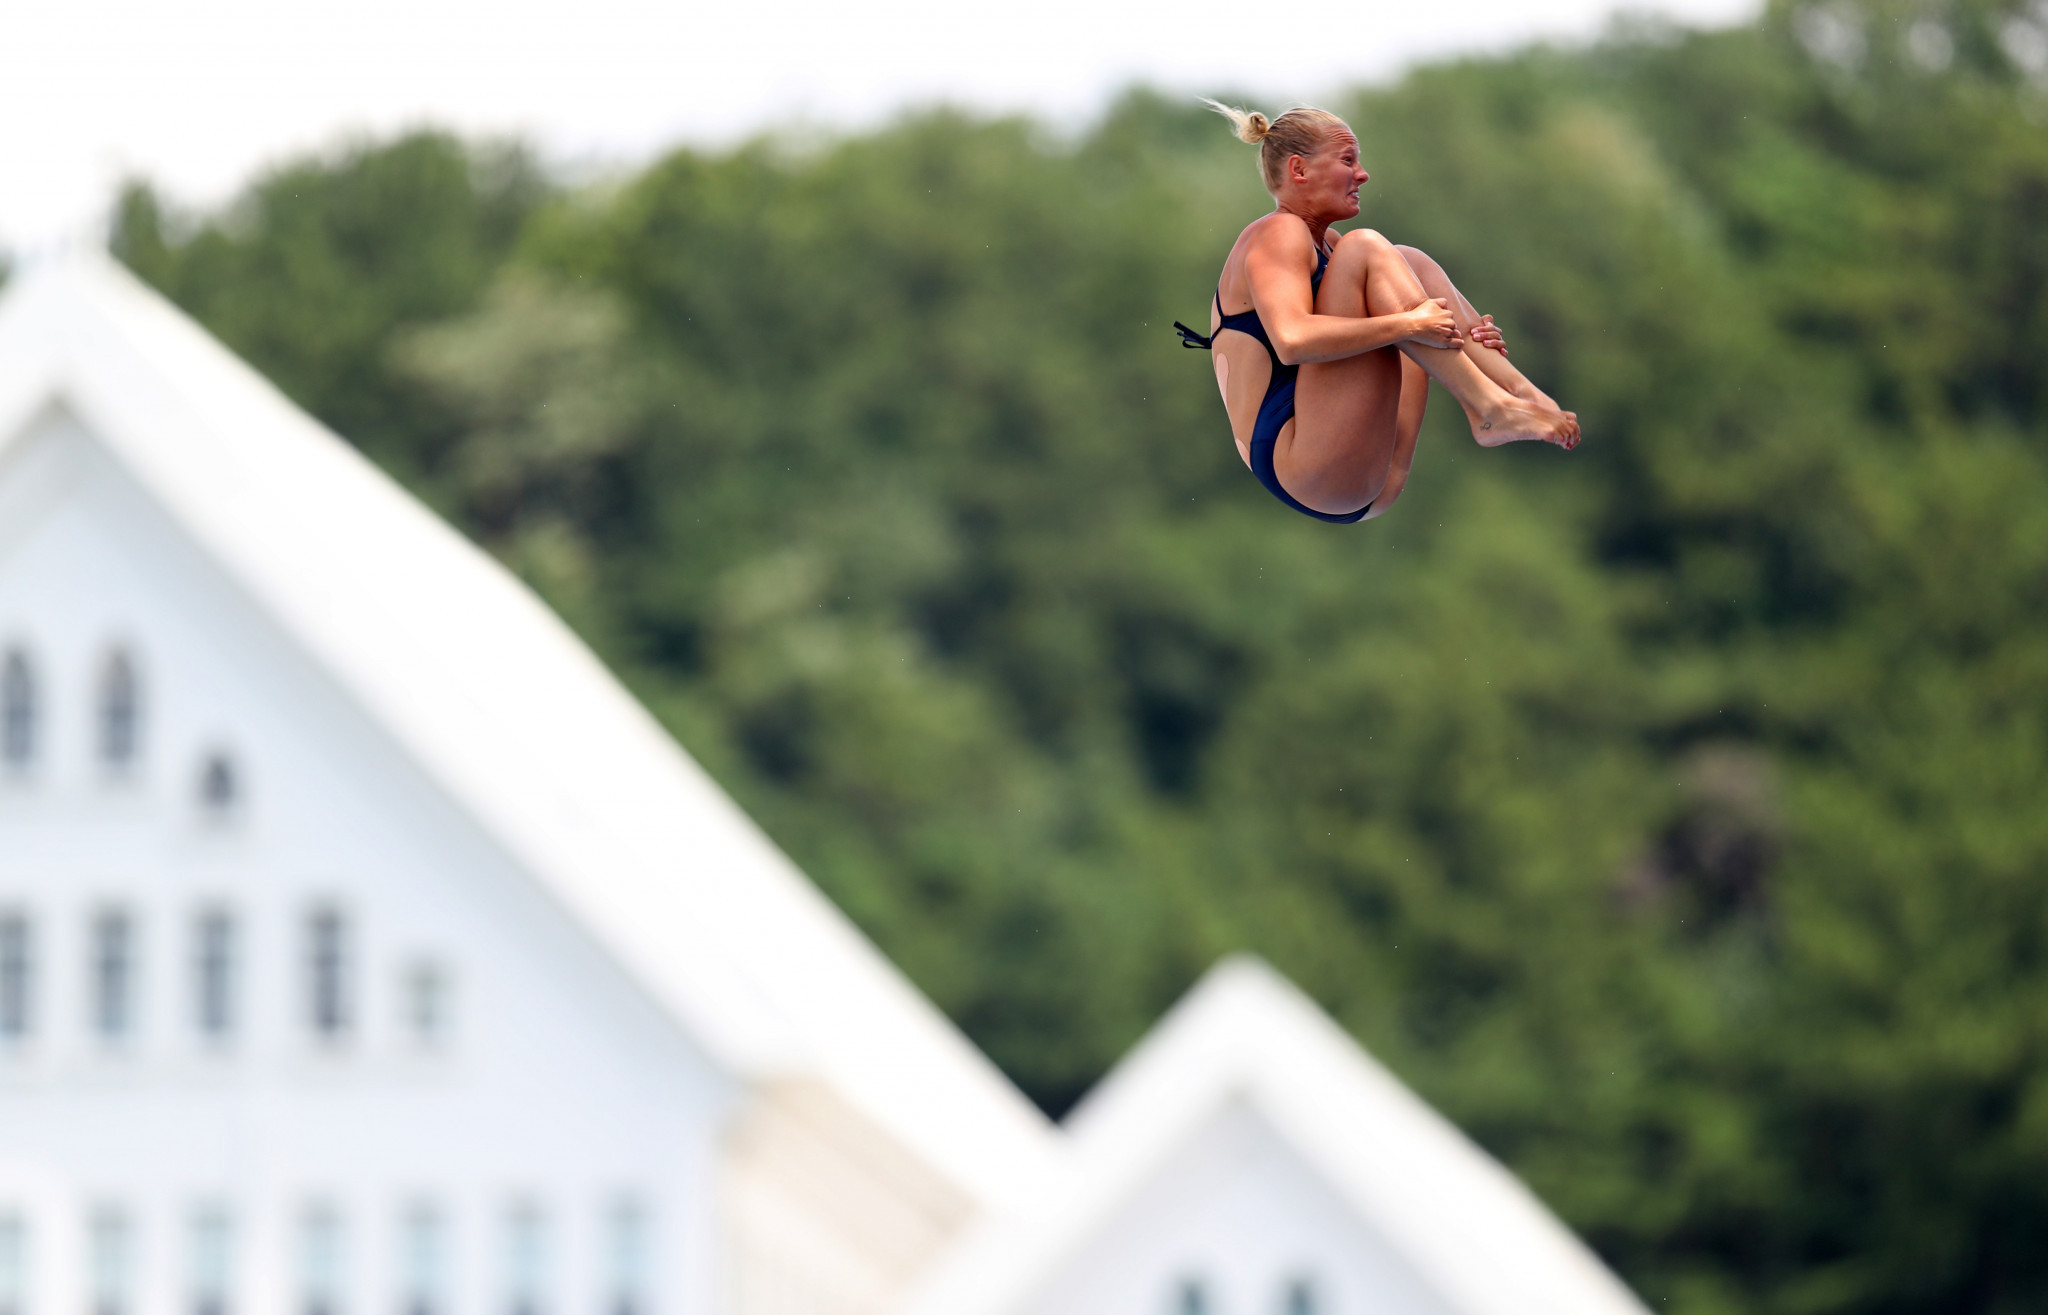 Rhiannan Iffland won gold in the women's high diving  ©Getty Images